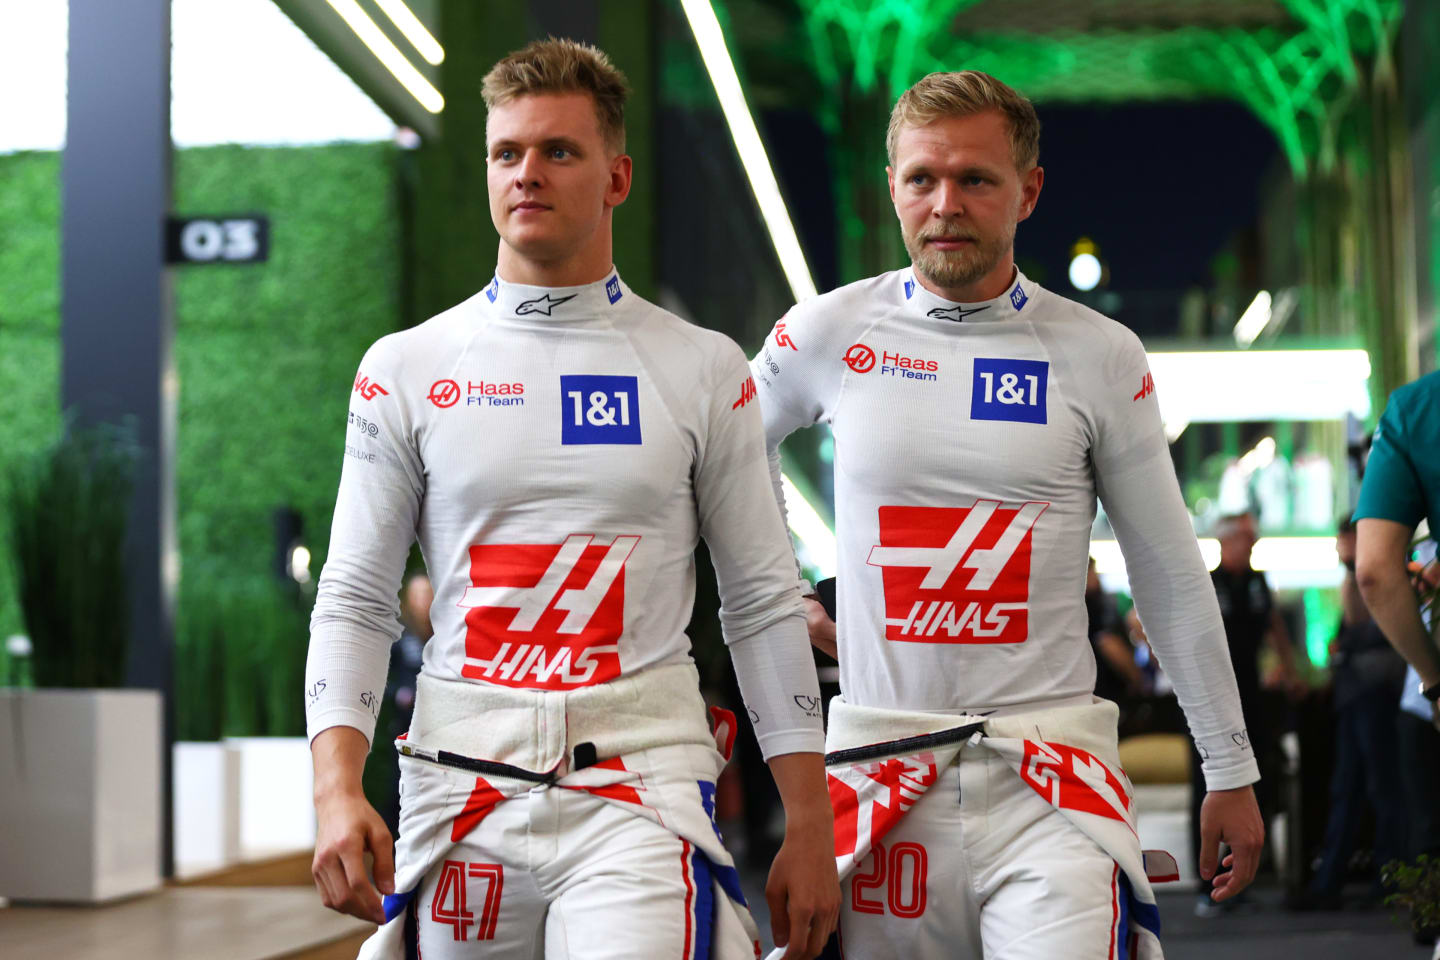 JEDDAH, SAUDI ARABIA - MARCH 25:  Mick Schumacher of Germany and Haas F1 and Kevin Magnussen of Denmark and Haas F1 walk in the paddock after practice ahead of the F1 Grand Prix of Saudi Arabia at the Jeddah Corniche Circuit on March 25, 2022 in Jeddah, Saudi Arabia. (Photo by Dan Istitene - Formula 1/Formula 1 via Getty Images)